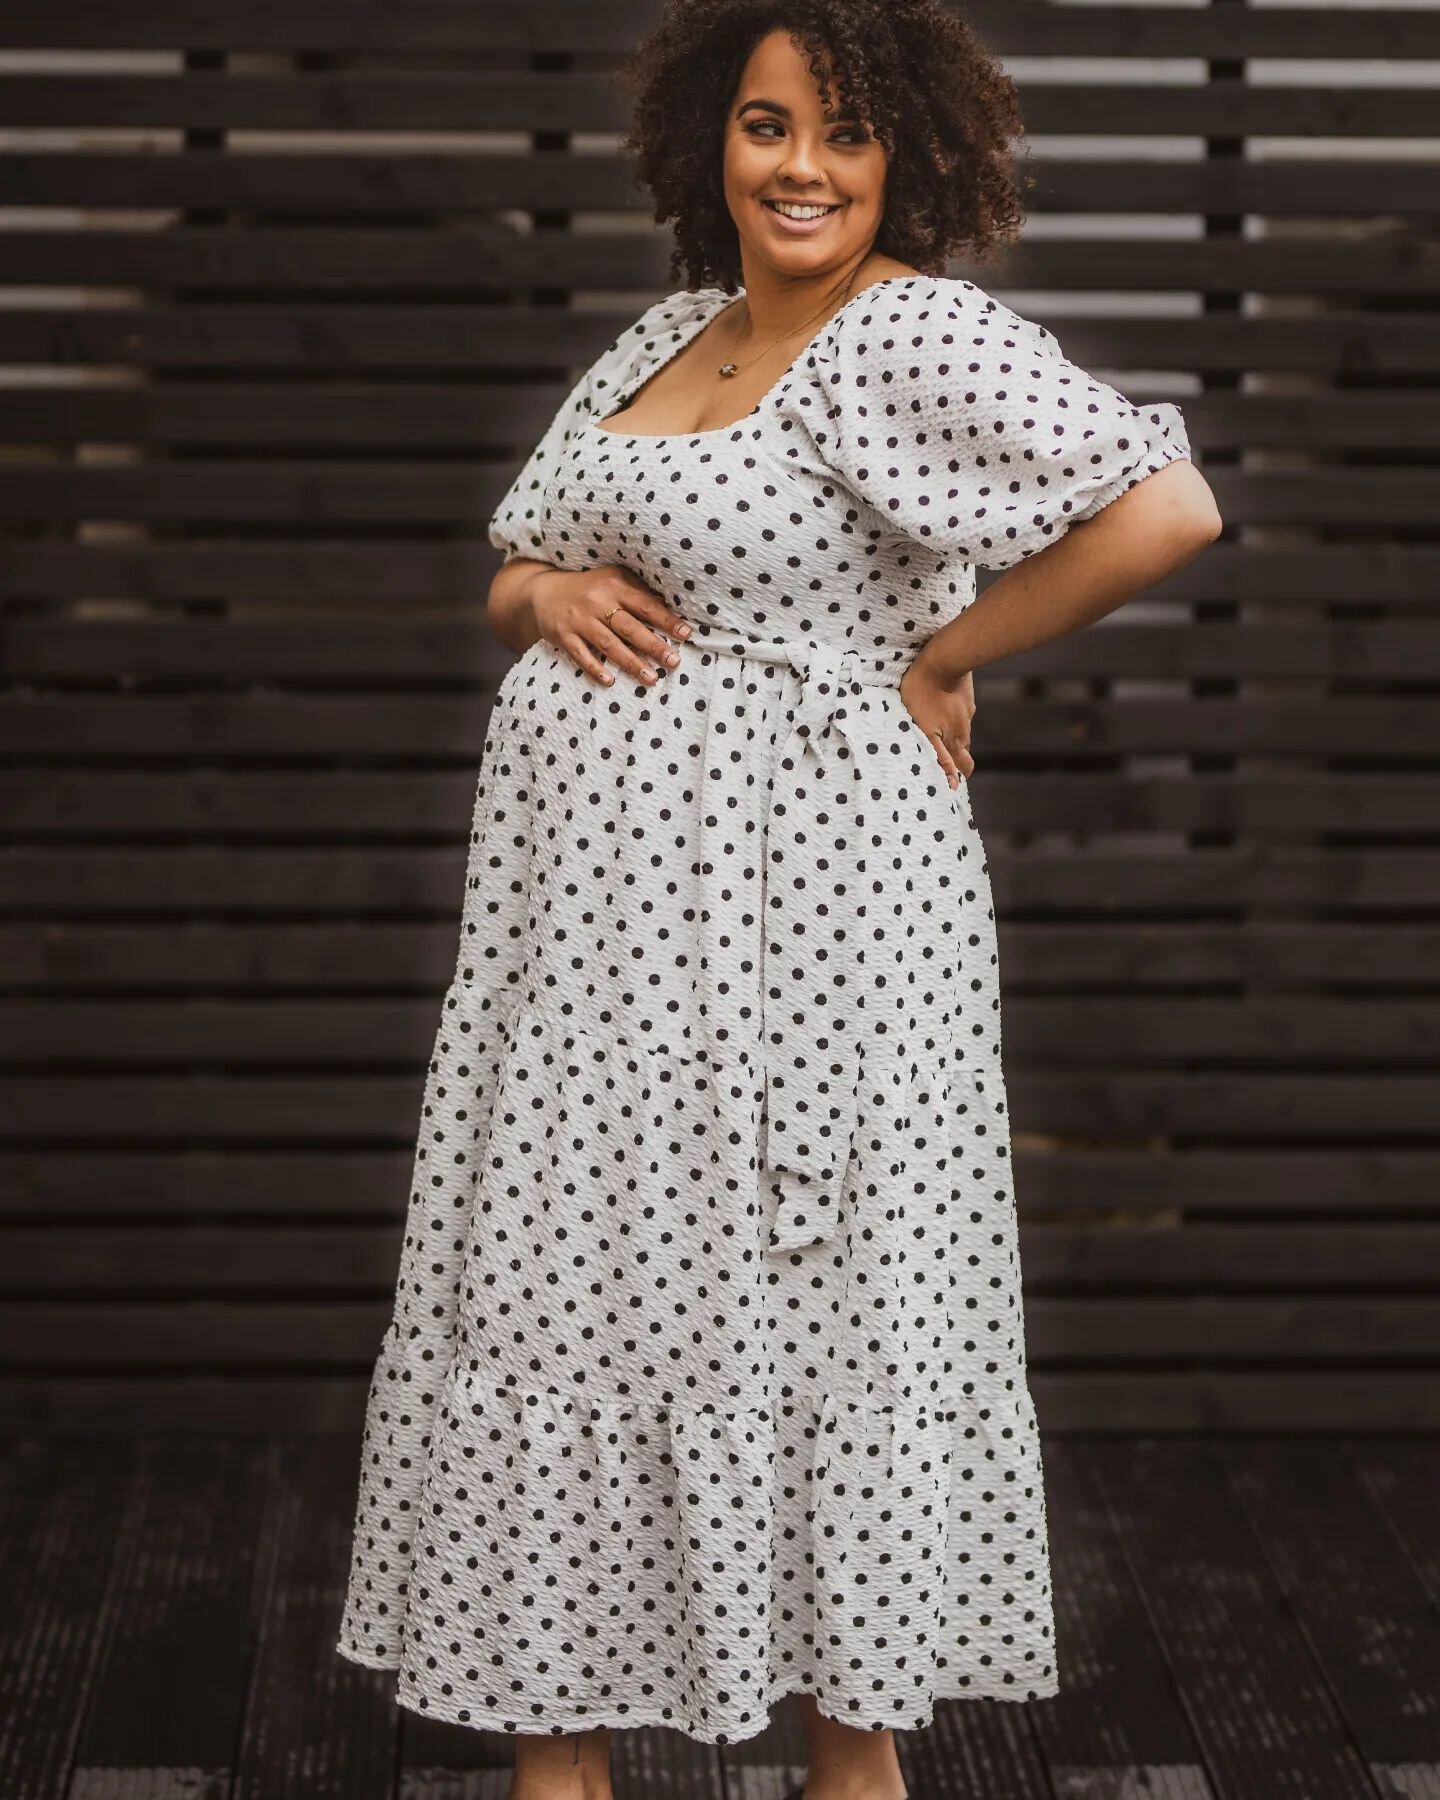 Happy pay weekend 🤑
Fancy treating yourself to a new outfit? Our Polka Dot Midi Dress is super versatile; it is suitable for bump, beyond and is feeding friendly too. We know customers who have worn it to a wedding, their baby shower and also for ev